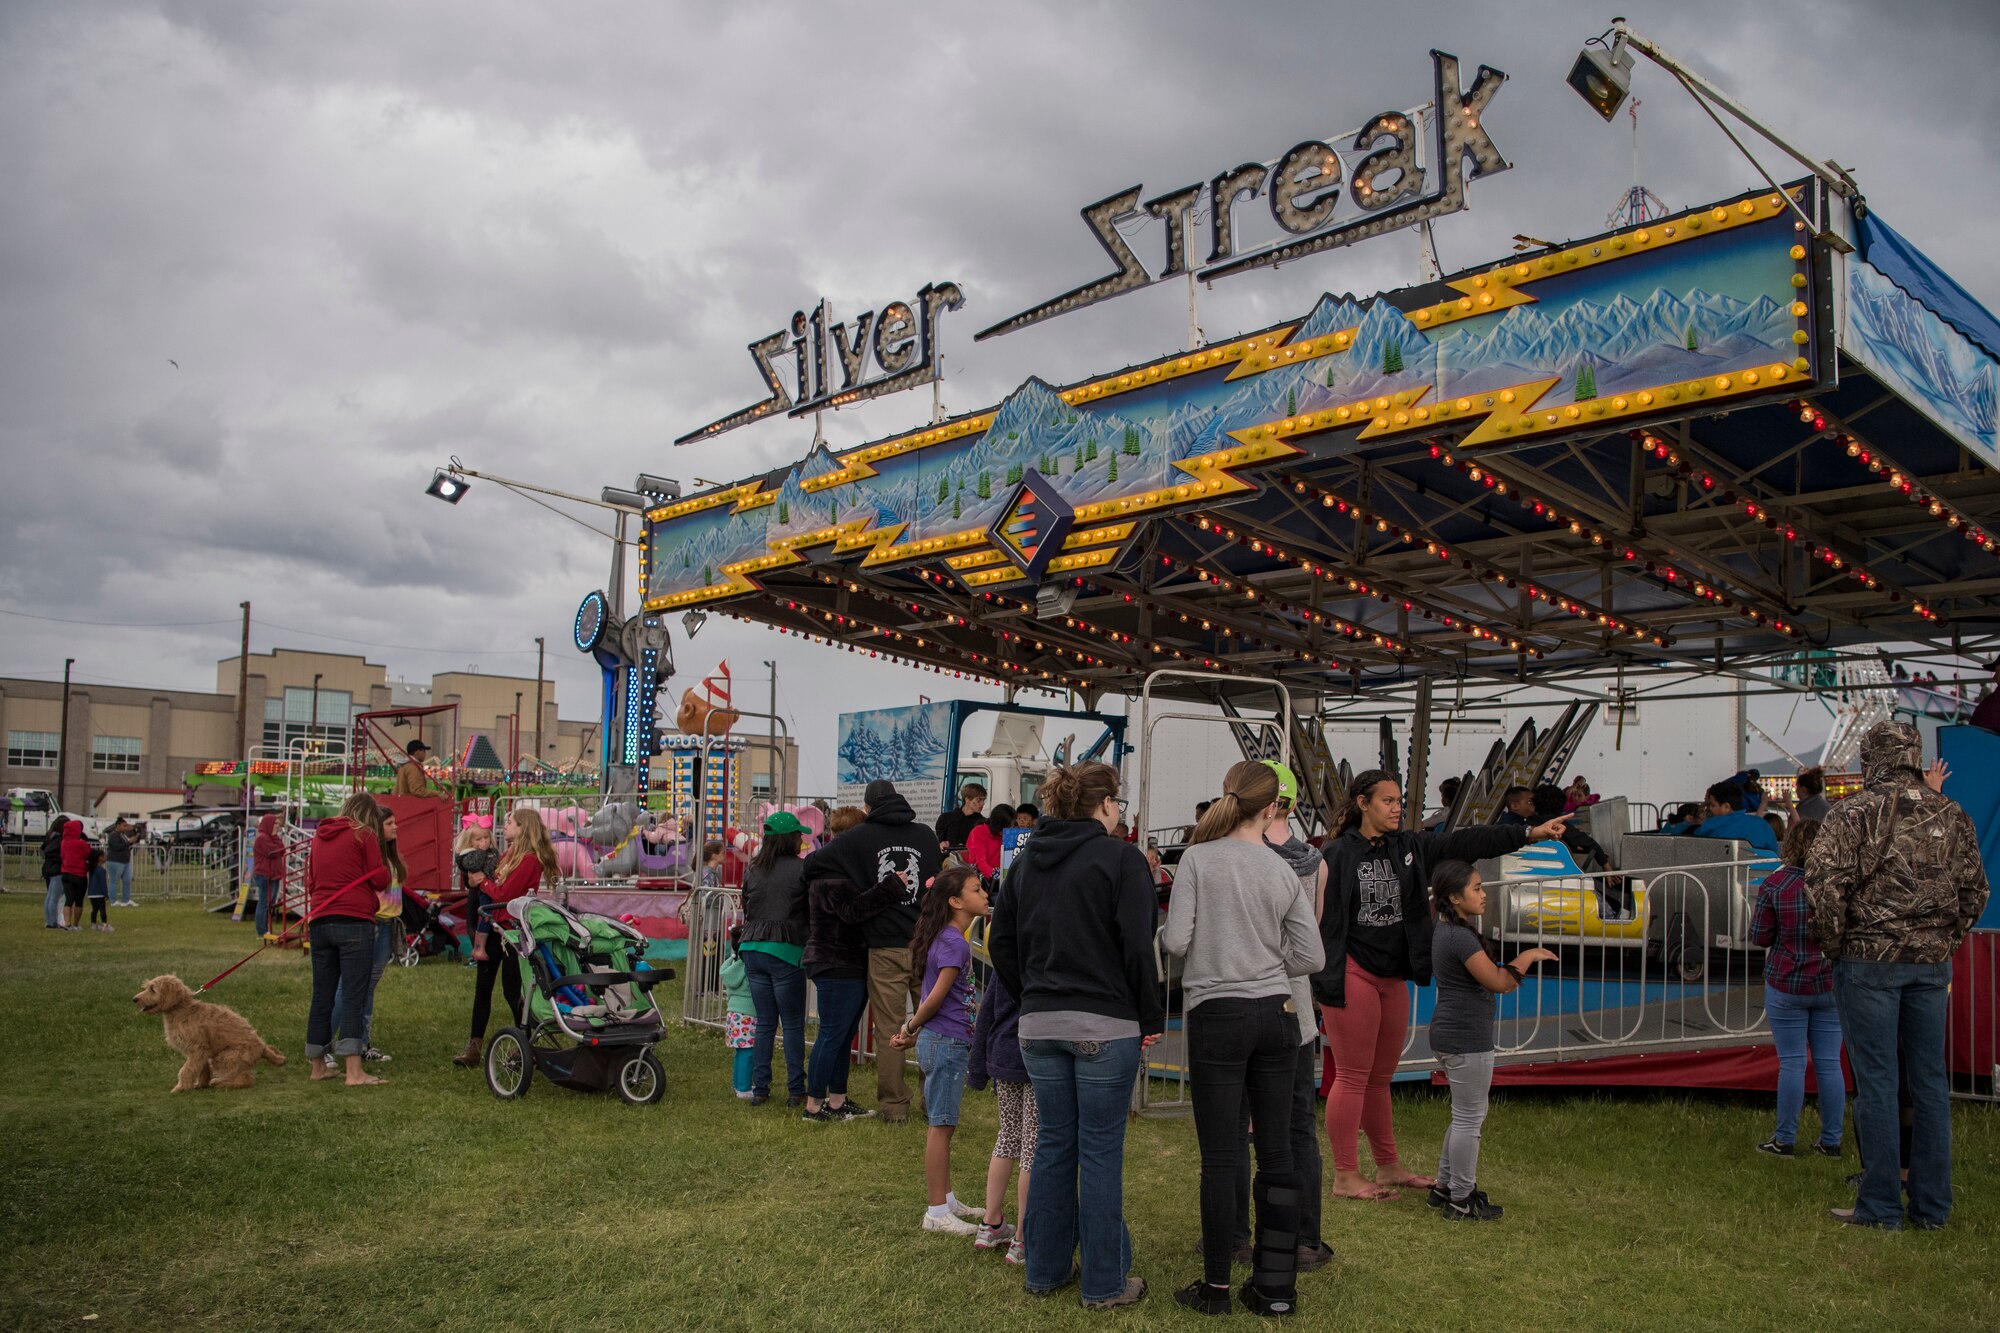 Participants wait in line for an amusement ride during the 3rd annual Summer Fest hosted by the 673d Force Support Squadron at Joint Base Elmendorf-Richardson, Alaska, July 8, 2018. The event was open to anyone with base access and offered free activities such as carnival rides, a petting zoo, face painting, a bungee trampoline, and carnival games.